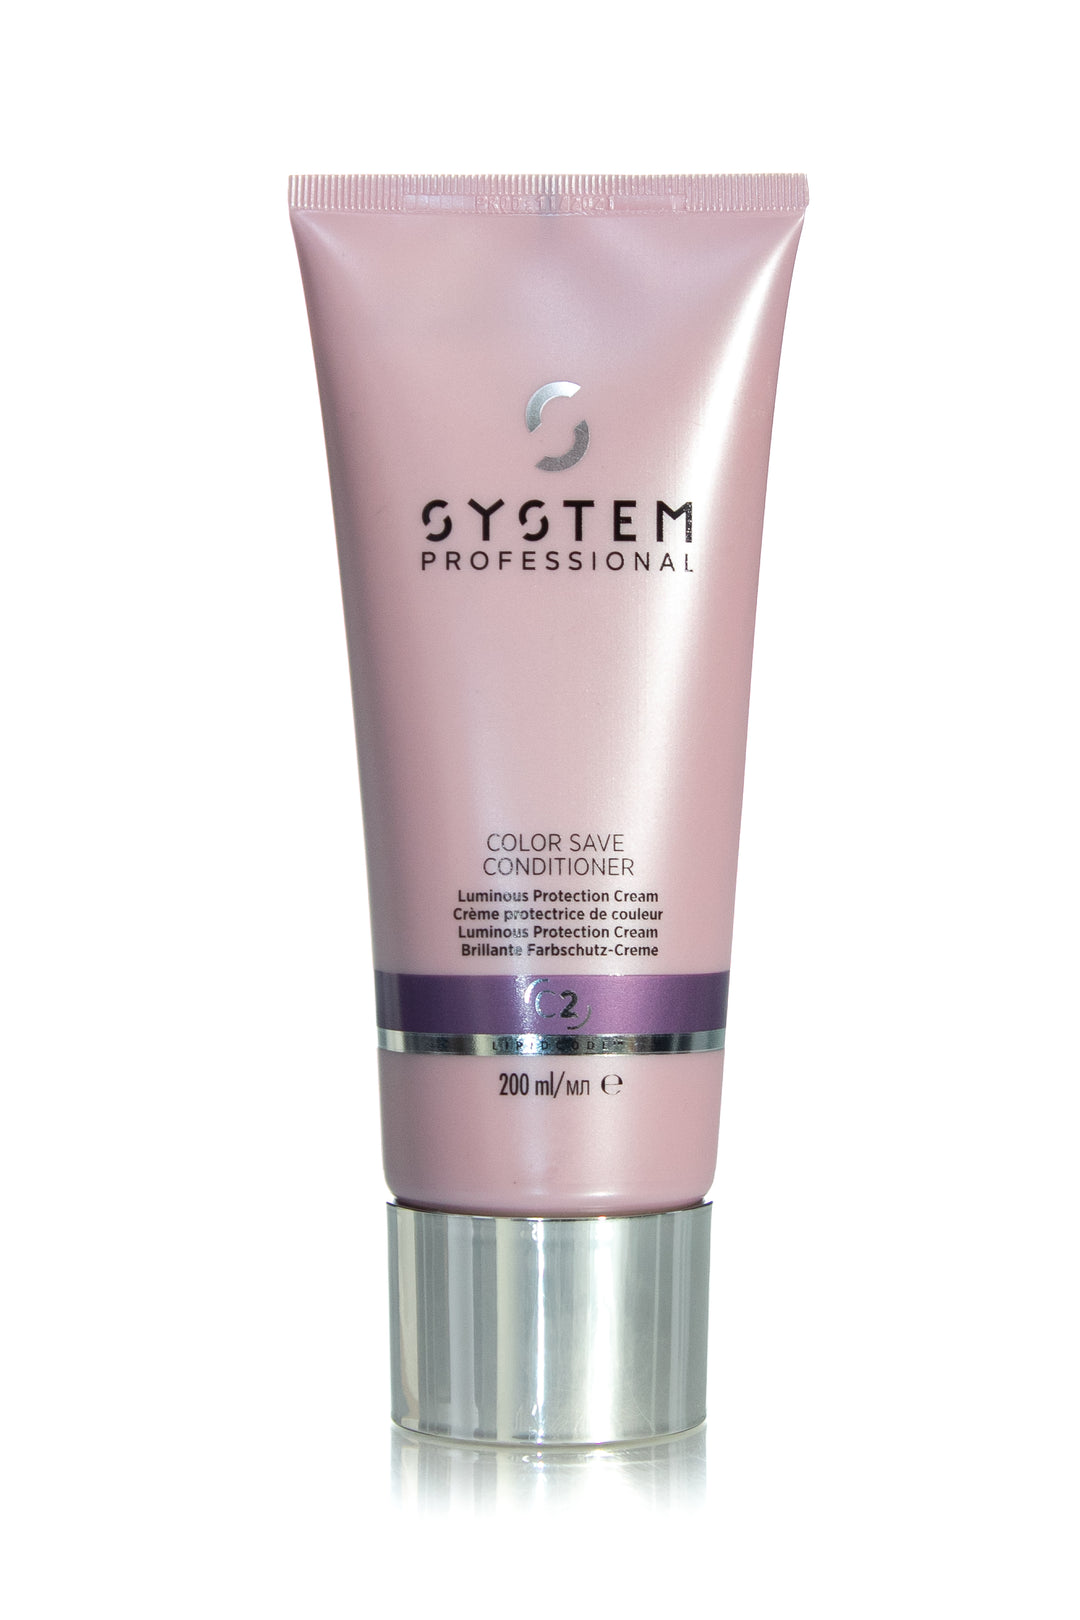 SYSTEM PROFESSIONAL Color Save Conditioner  | 200ml